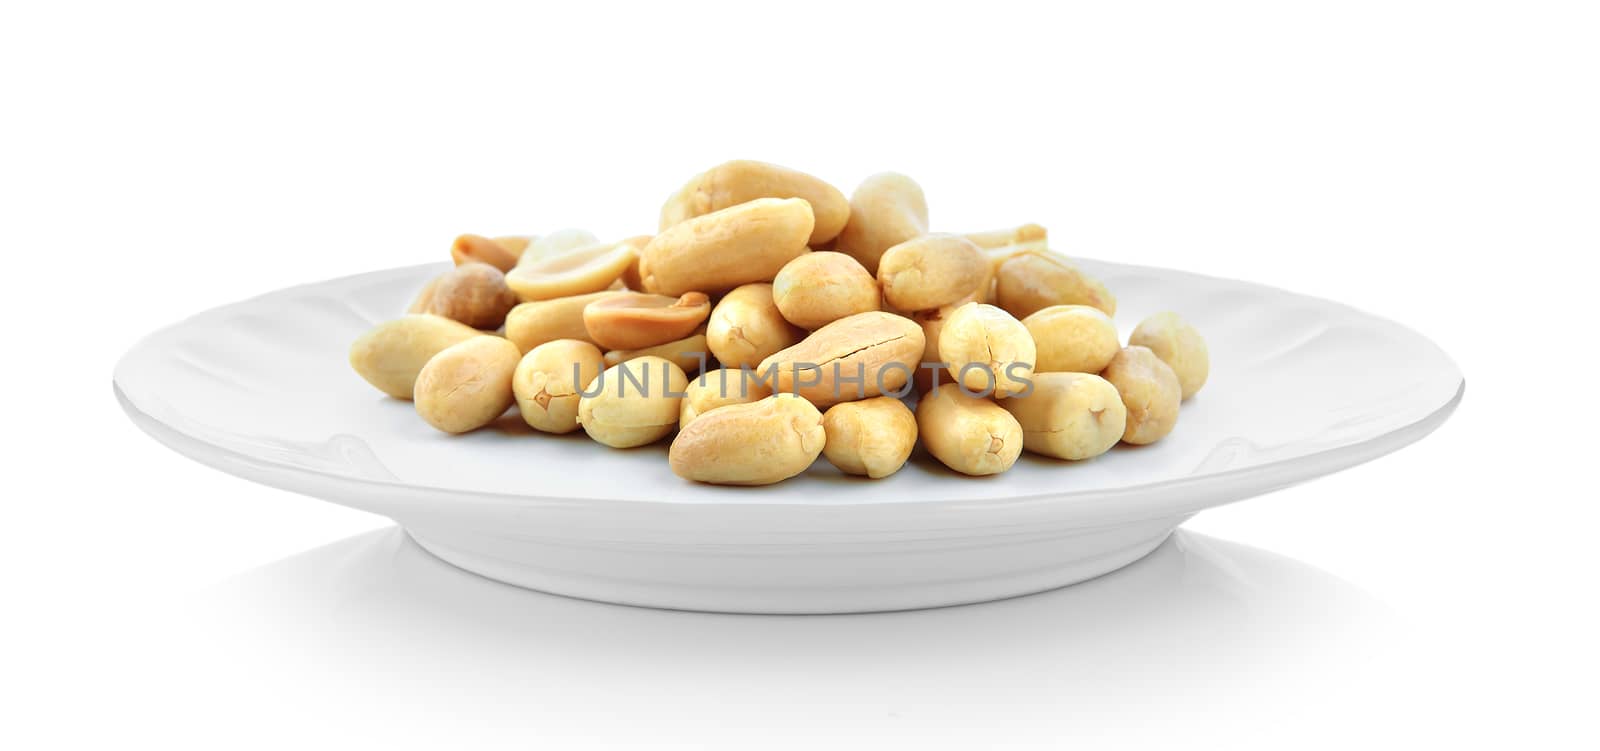 peanuts in white plate on white background by sommai